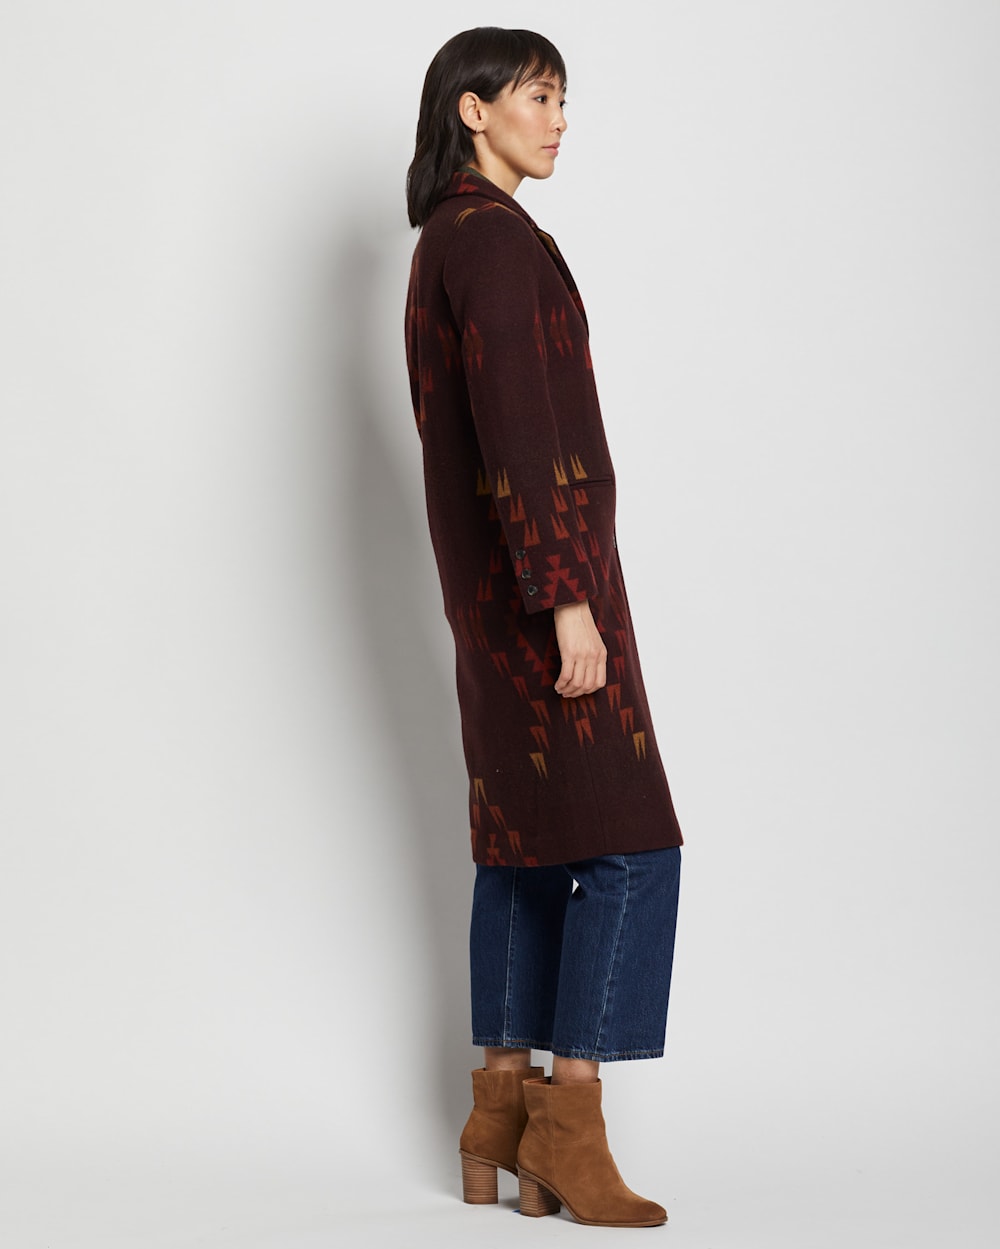 ALTERNATE VIEW OF WOMEN'S JACKSONVILLE WOOL COAT IN CABERNET MISSION TRAILS image number 6